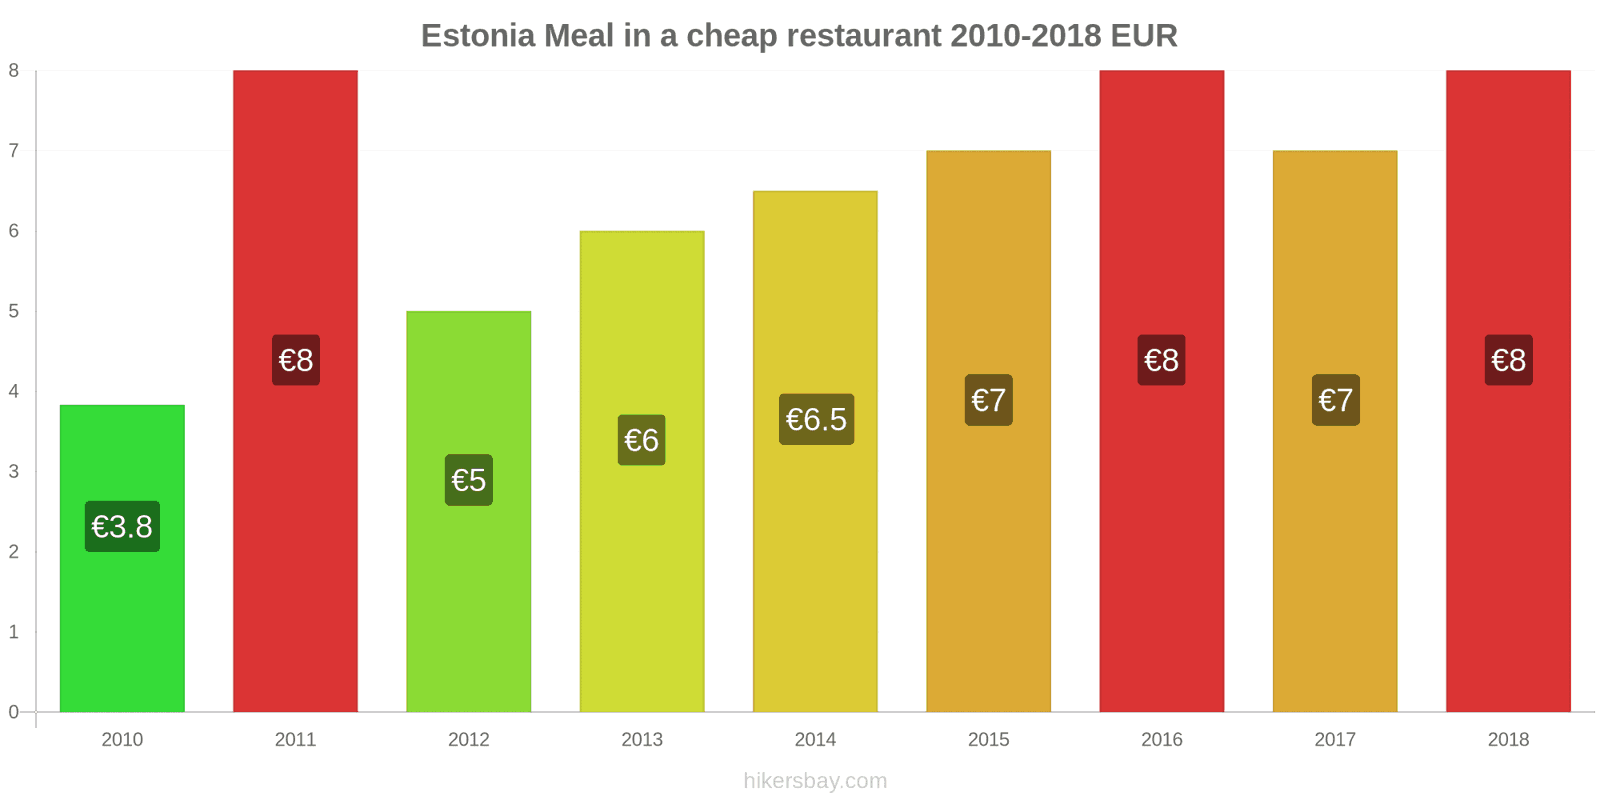 Estonia price changes Meal in a cheap restaurant hikersbay.com